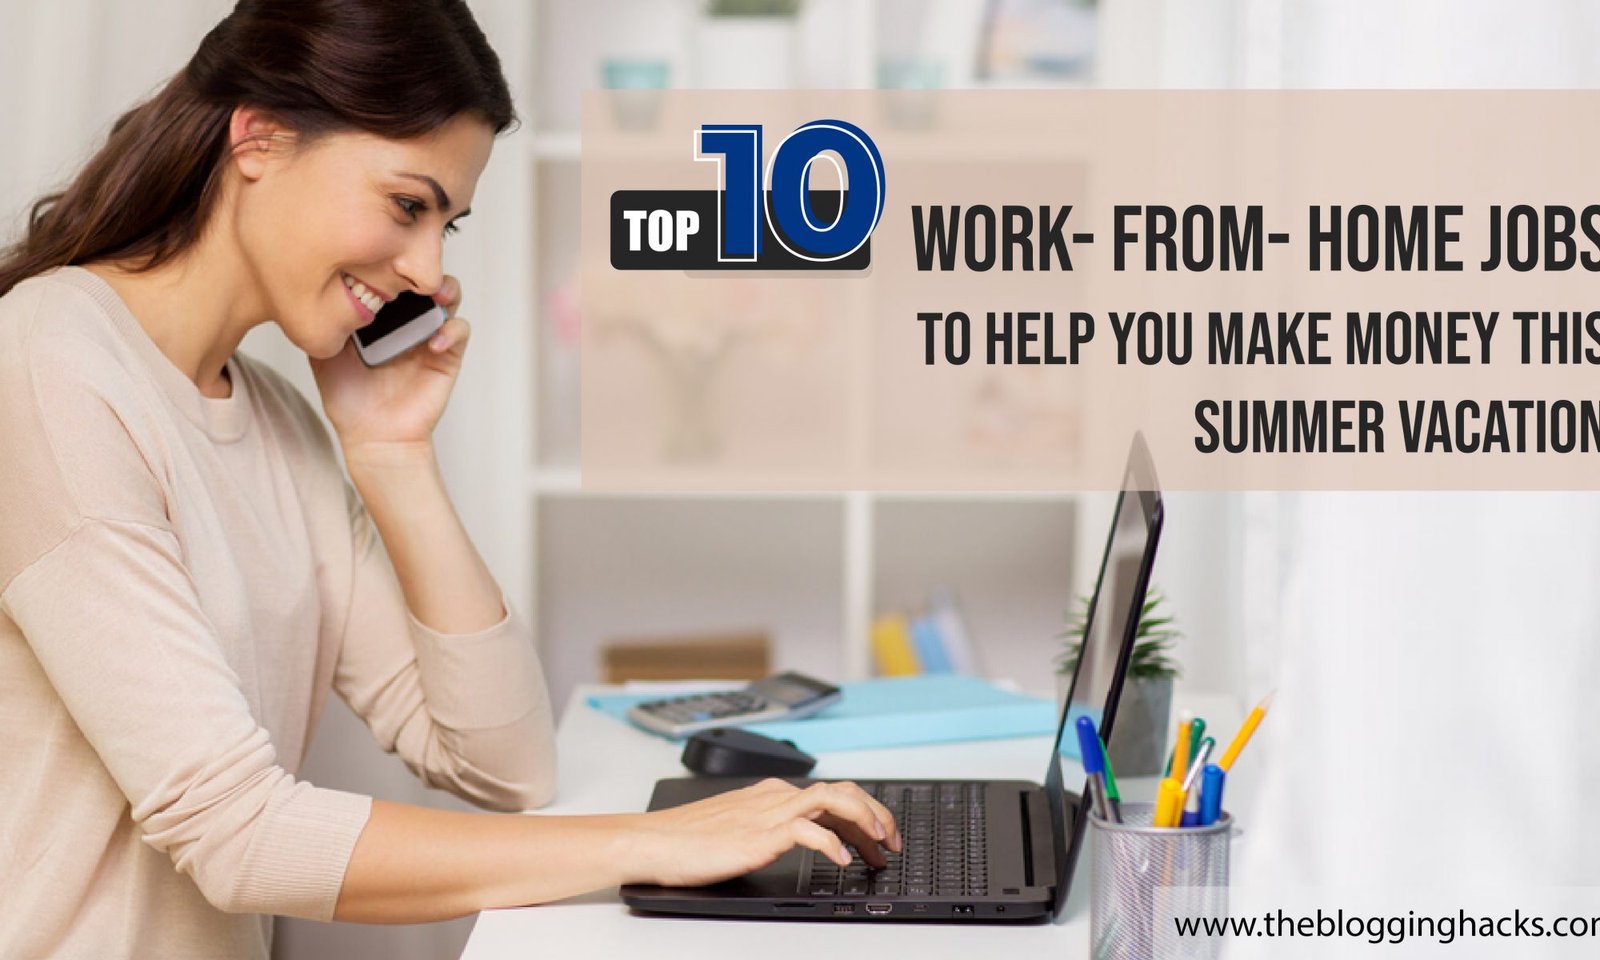 Work from home jobs to make money this summer